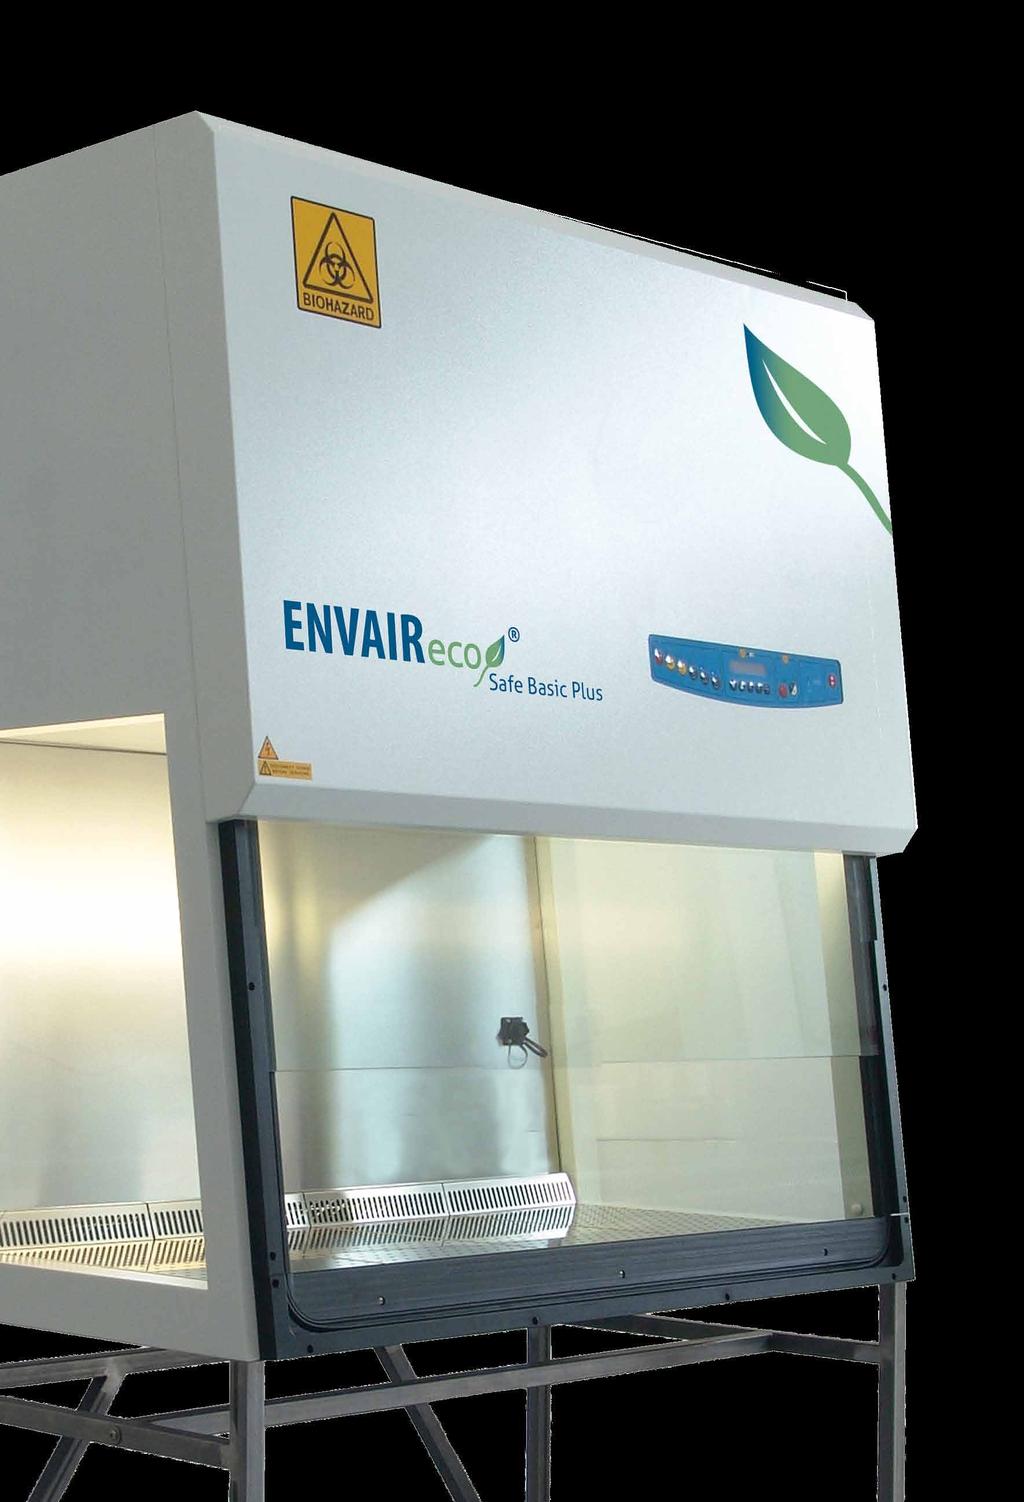 ENVAIR eco safe Basic Plus vertical laminar flow cabinets are Class II Microbiological Safety Cabinets - designed and built to performance requirements of the EN-12469: 2000 European Standard, with